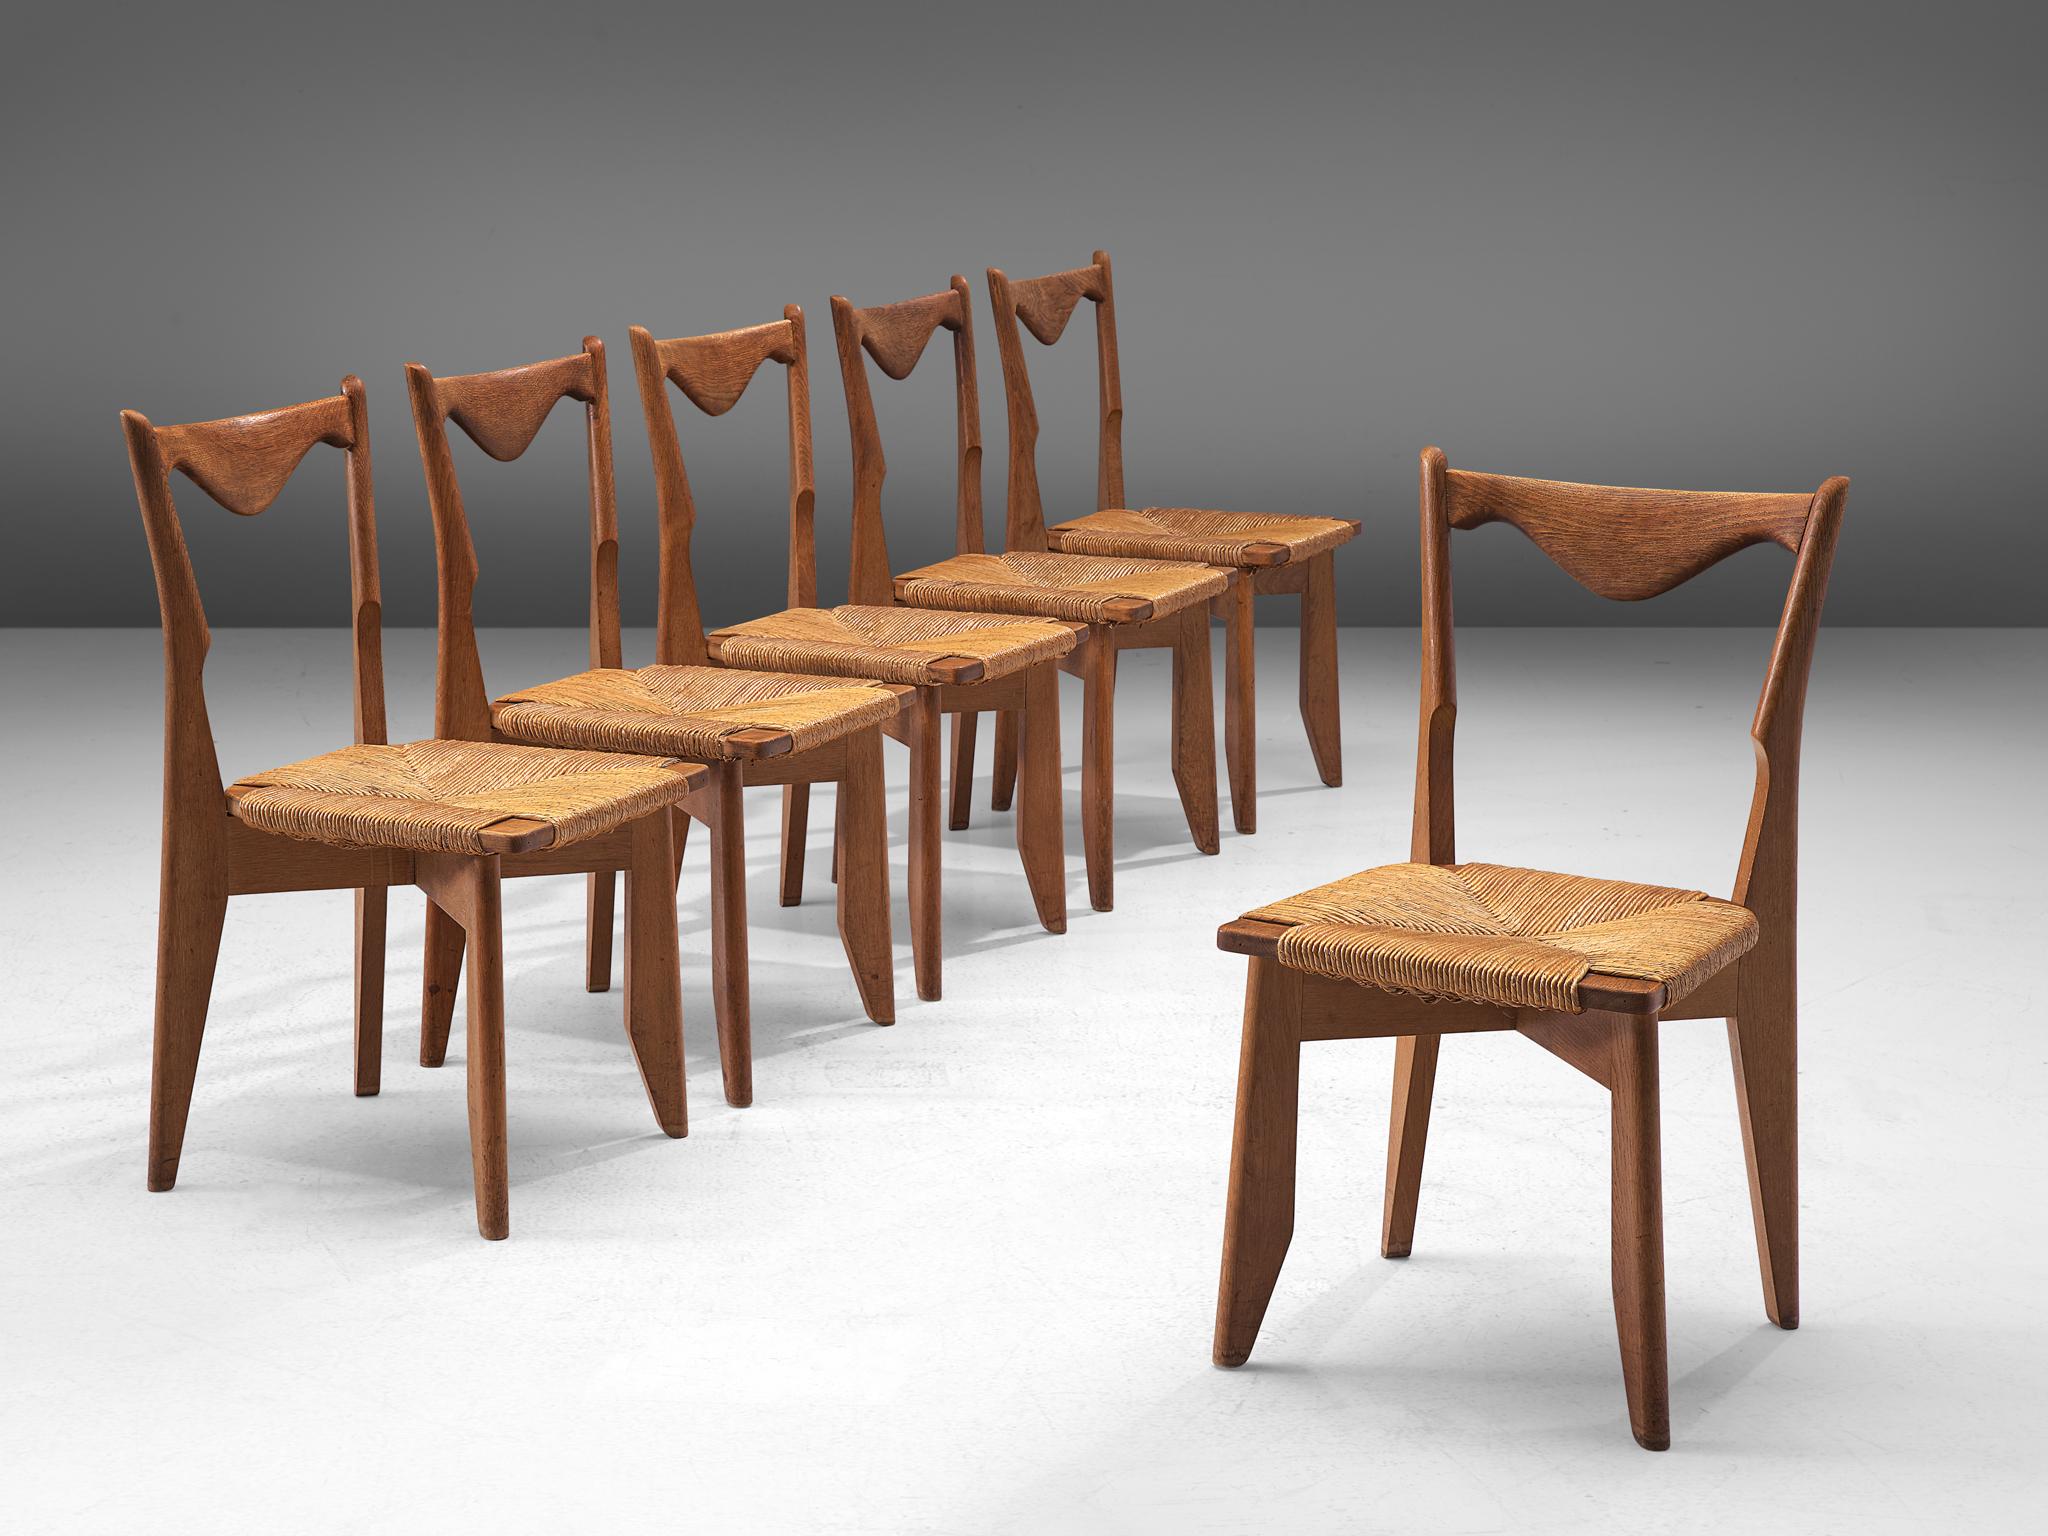 Guillerme & Chambron for Votre Maison, model Thibault, dining chairs, oak and rope, France, 1960s.

Set of six elegant dining chairs in solid oak by Guillerme and Chambron. These chairs have characteristic frames with tapered legs and a sculptural